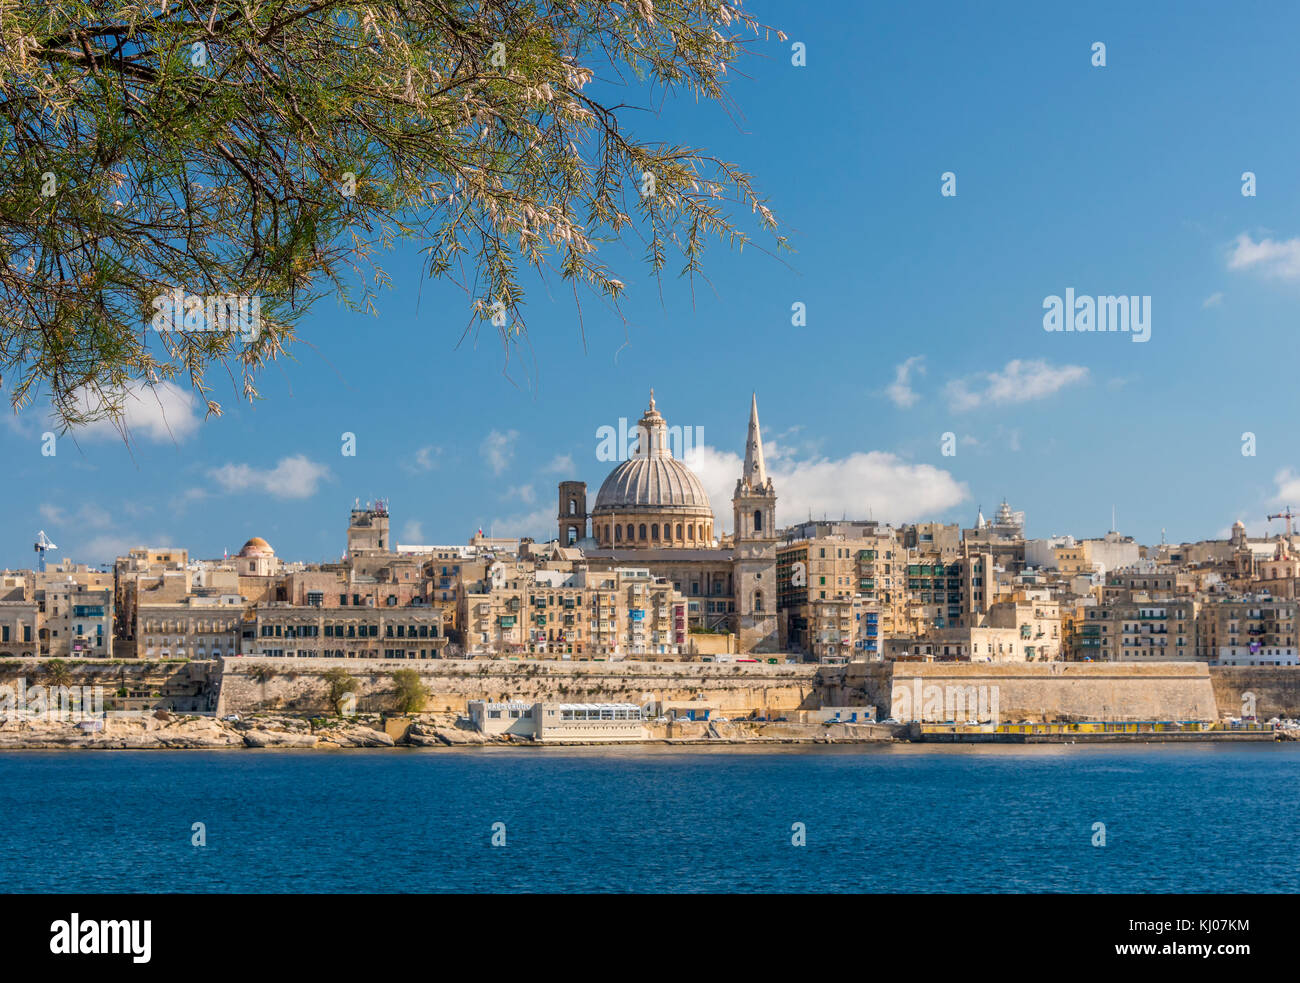 skyline of valletta in malta as viewed from acroos the water in sliema Stock Photo